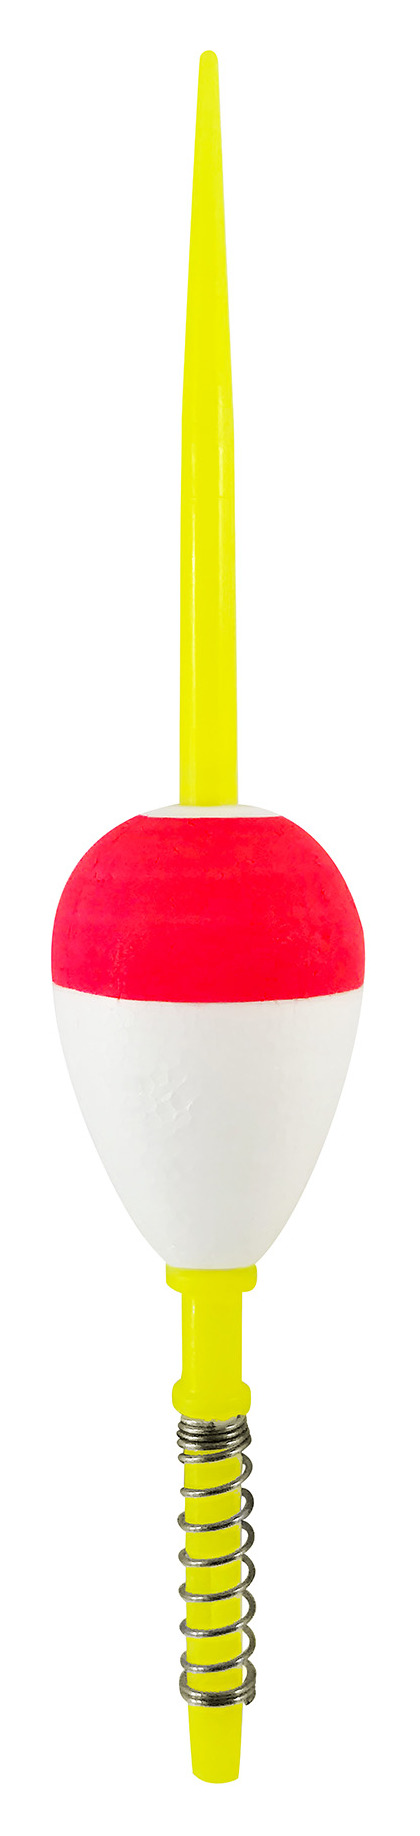 Thill Foam Pear Weighted Float - Slip Stick